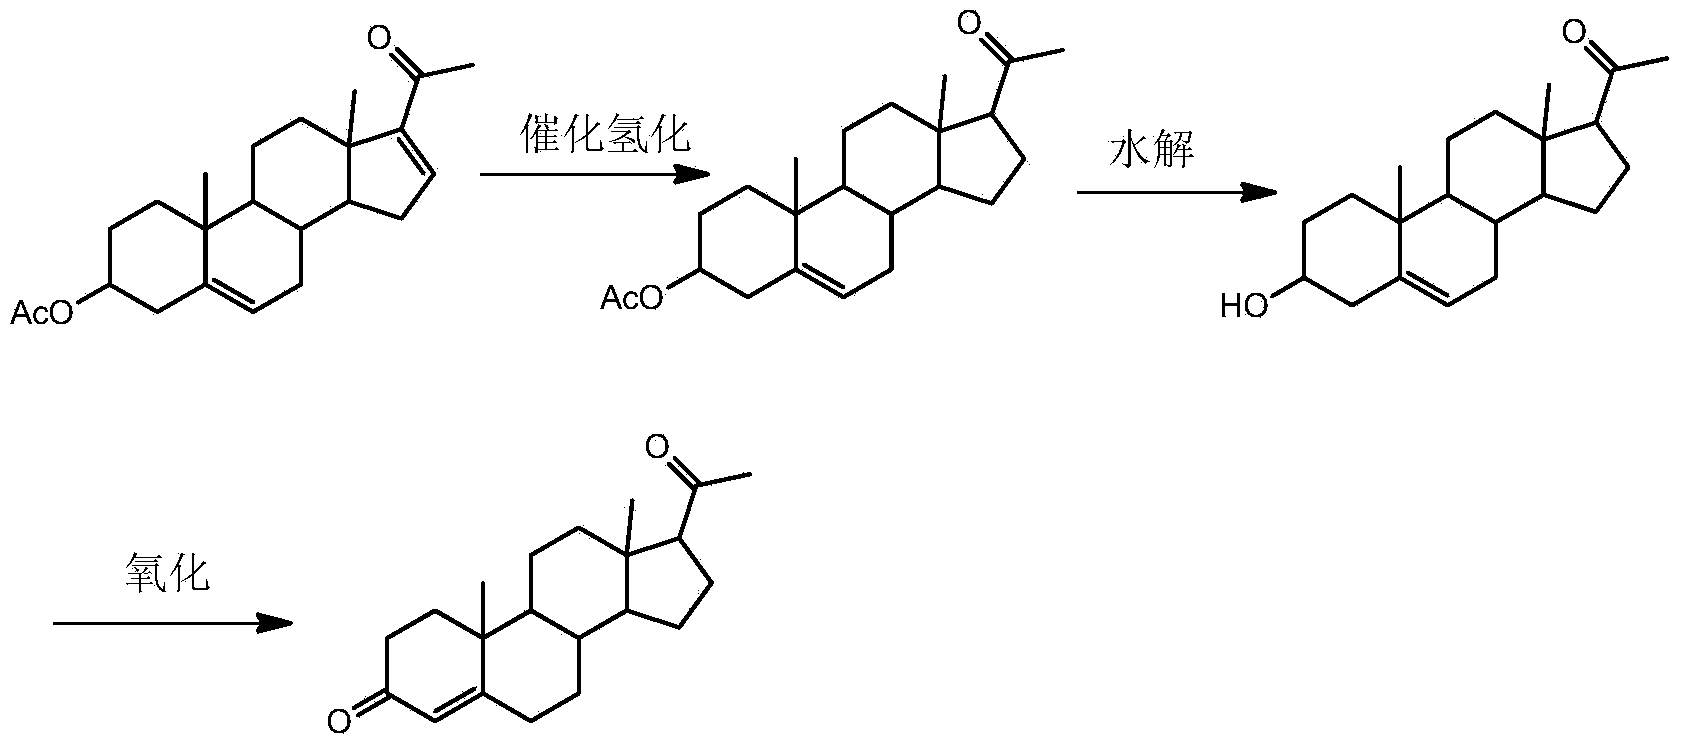 Synthetic method of pregnenolone acetate